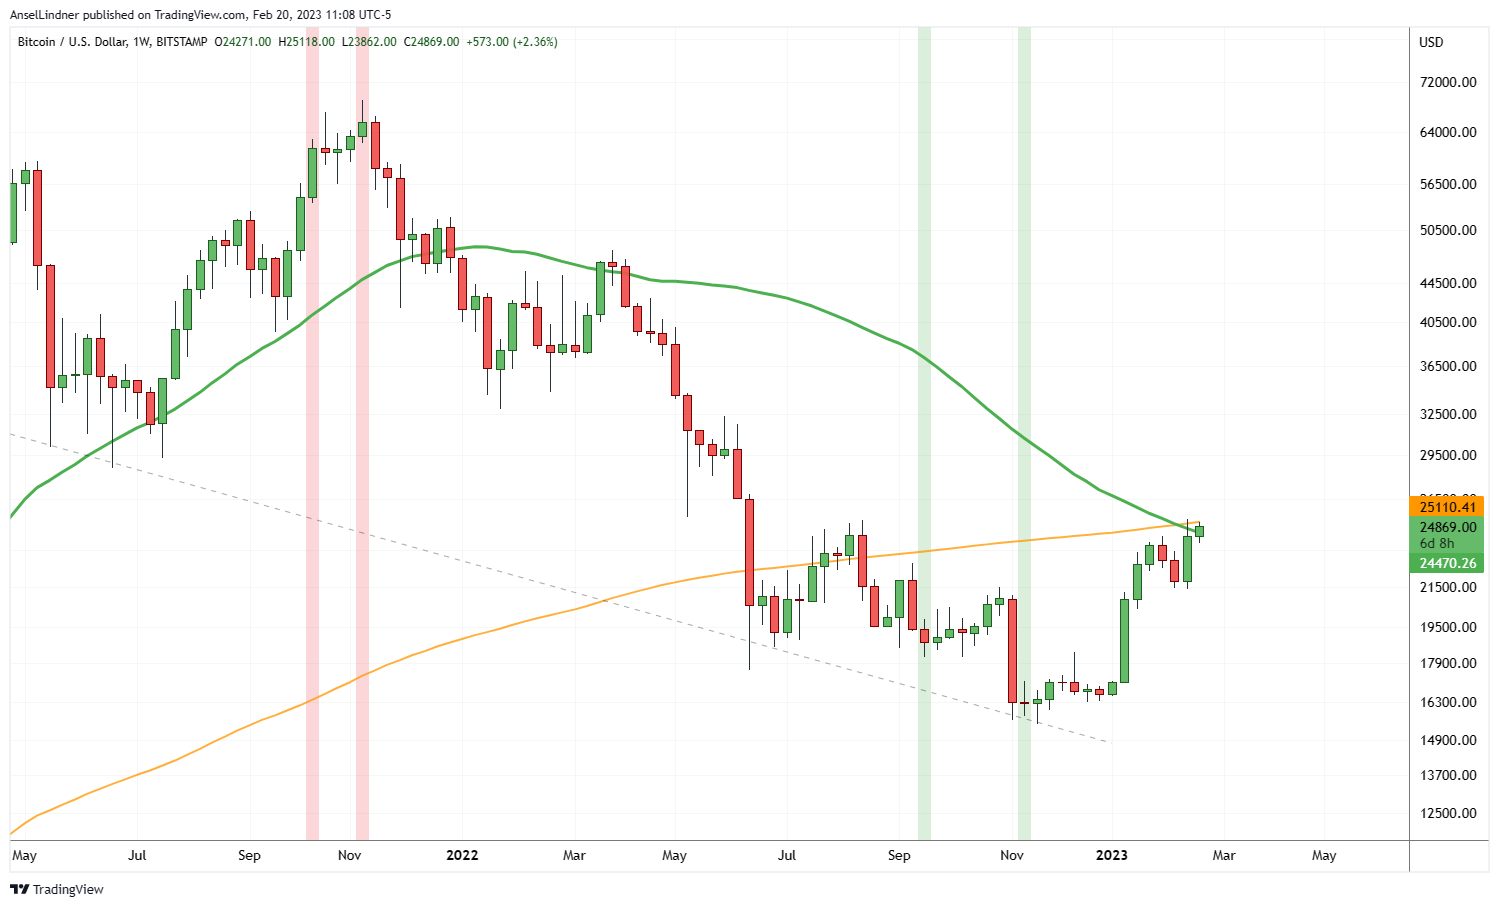 Bitcoin weekly chart with 50 and 200 period MAs